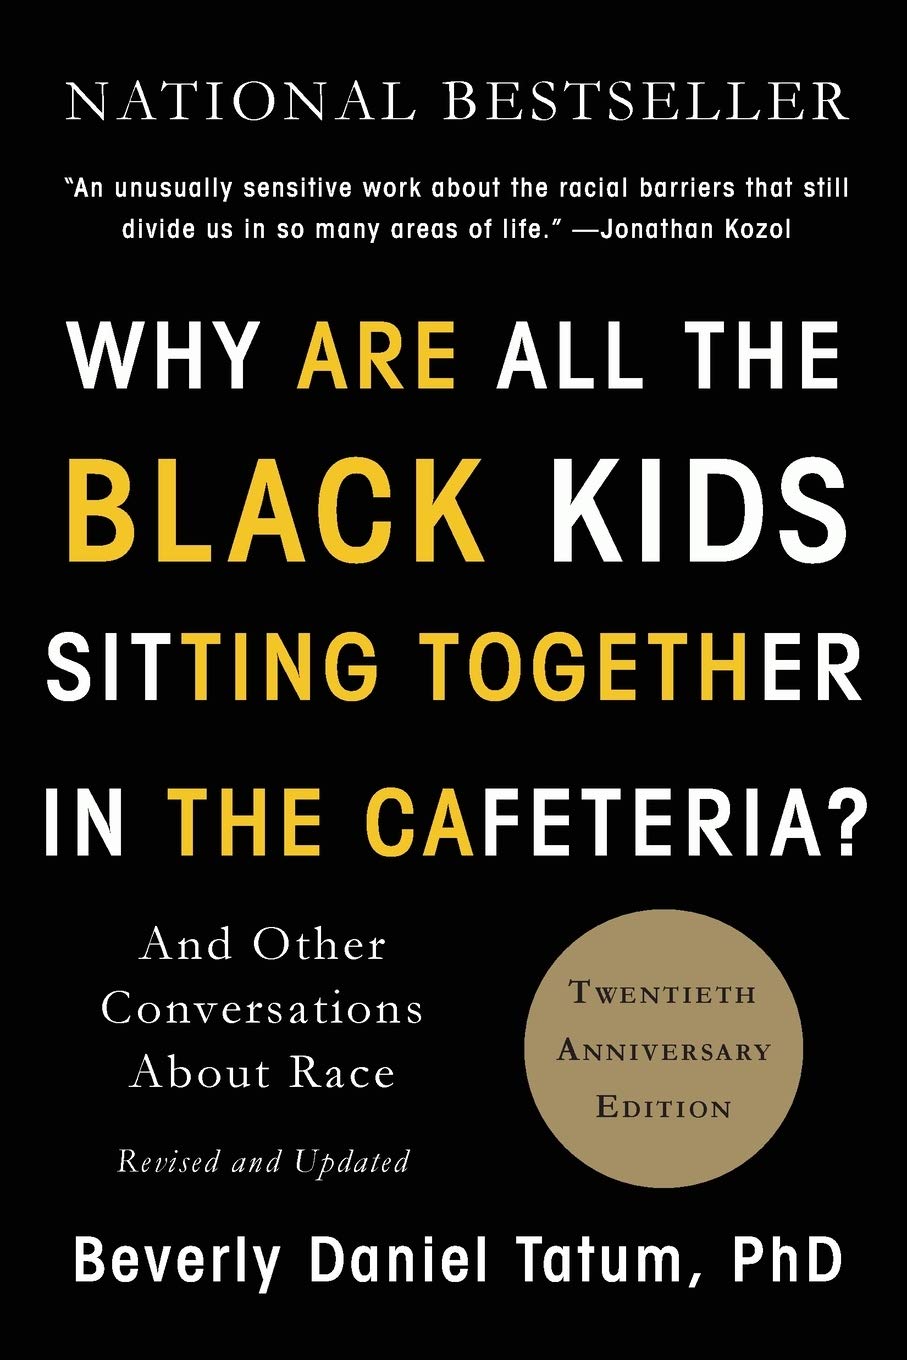 'Why Are All the Black Kids Sitting Together in the Cafeteria?' by Beverly Daniel Tatum